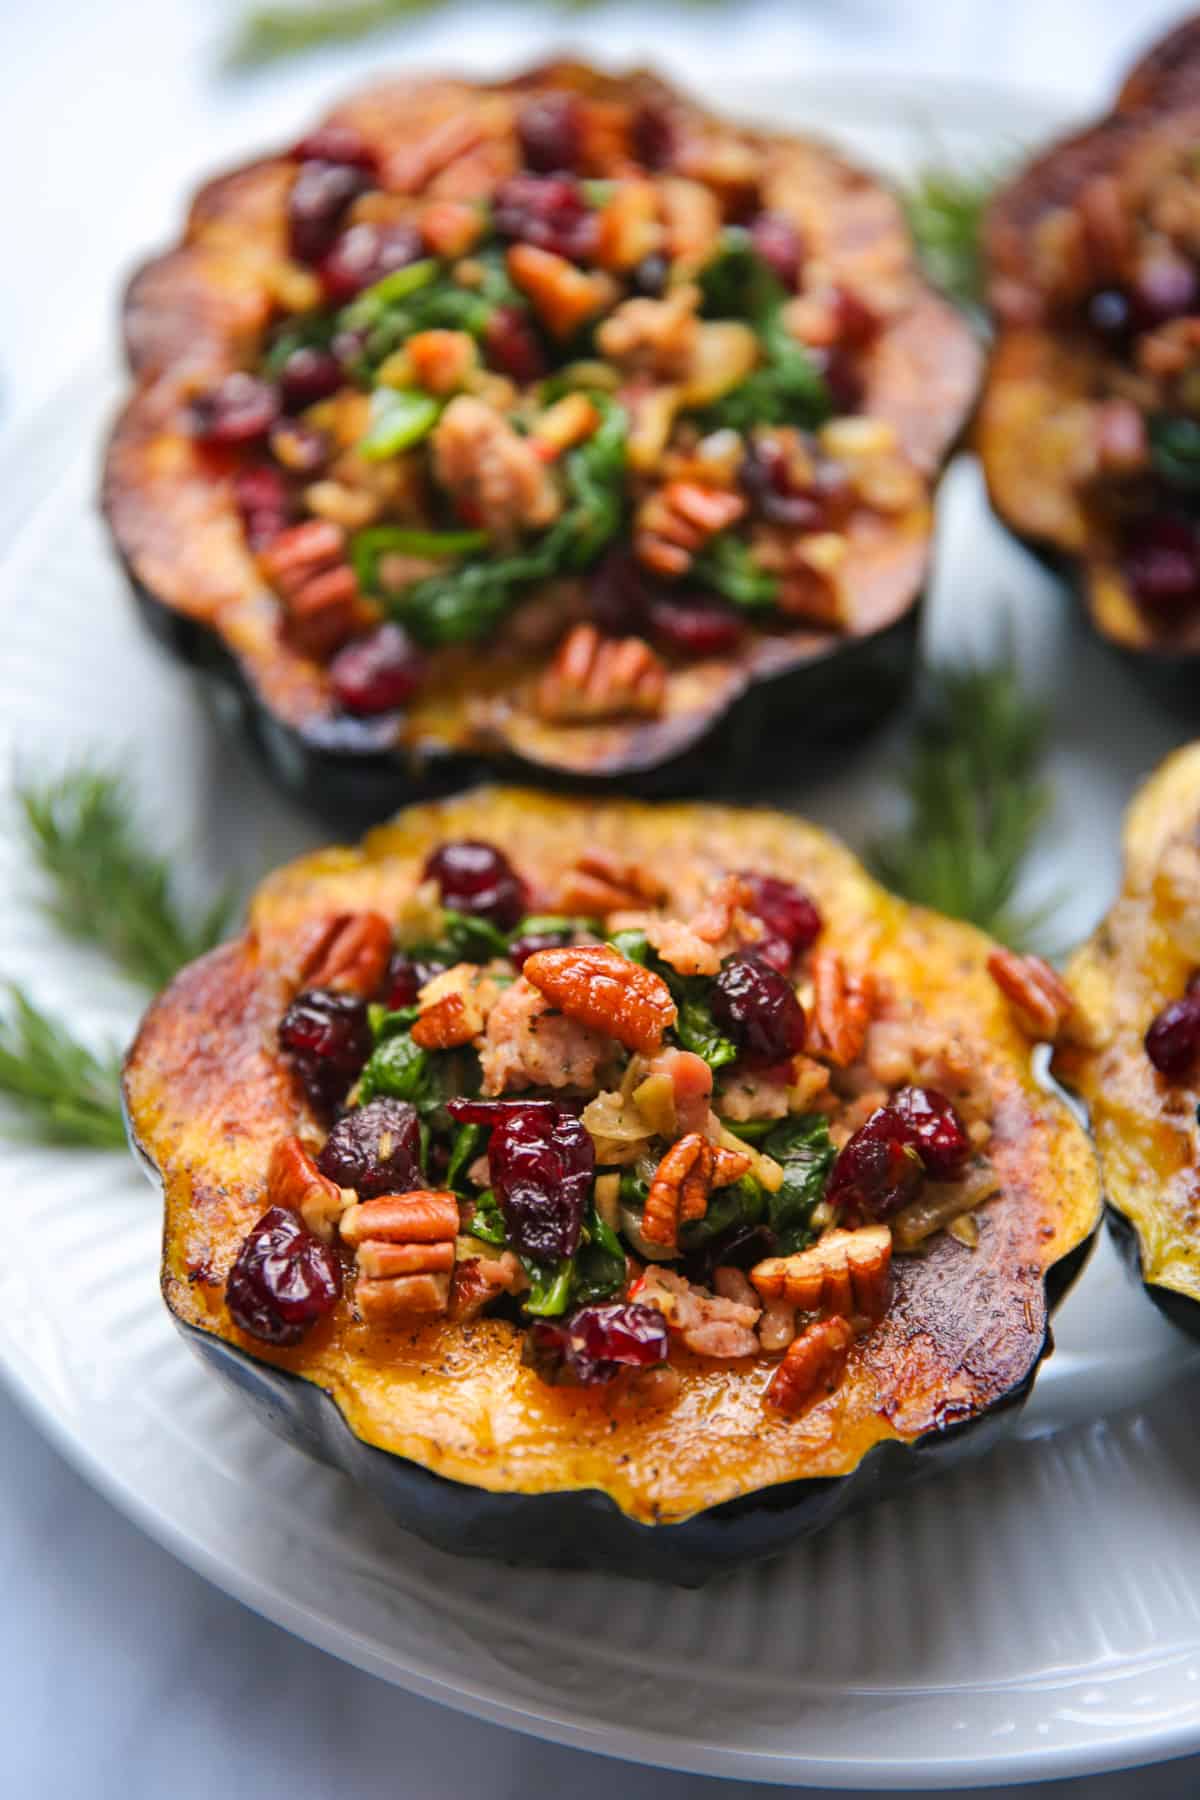 Pumpkin stuffed with sausage, spinach, dried cranberries and pecans on a white plate